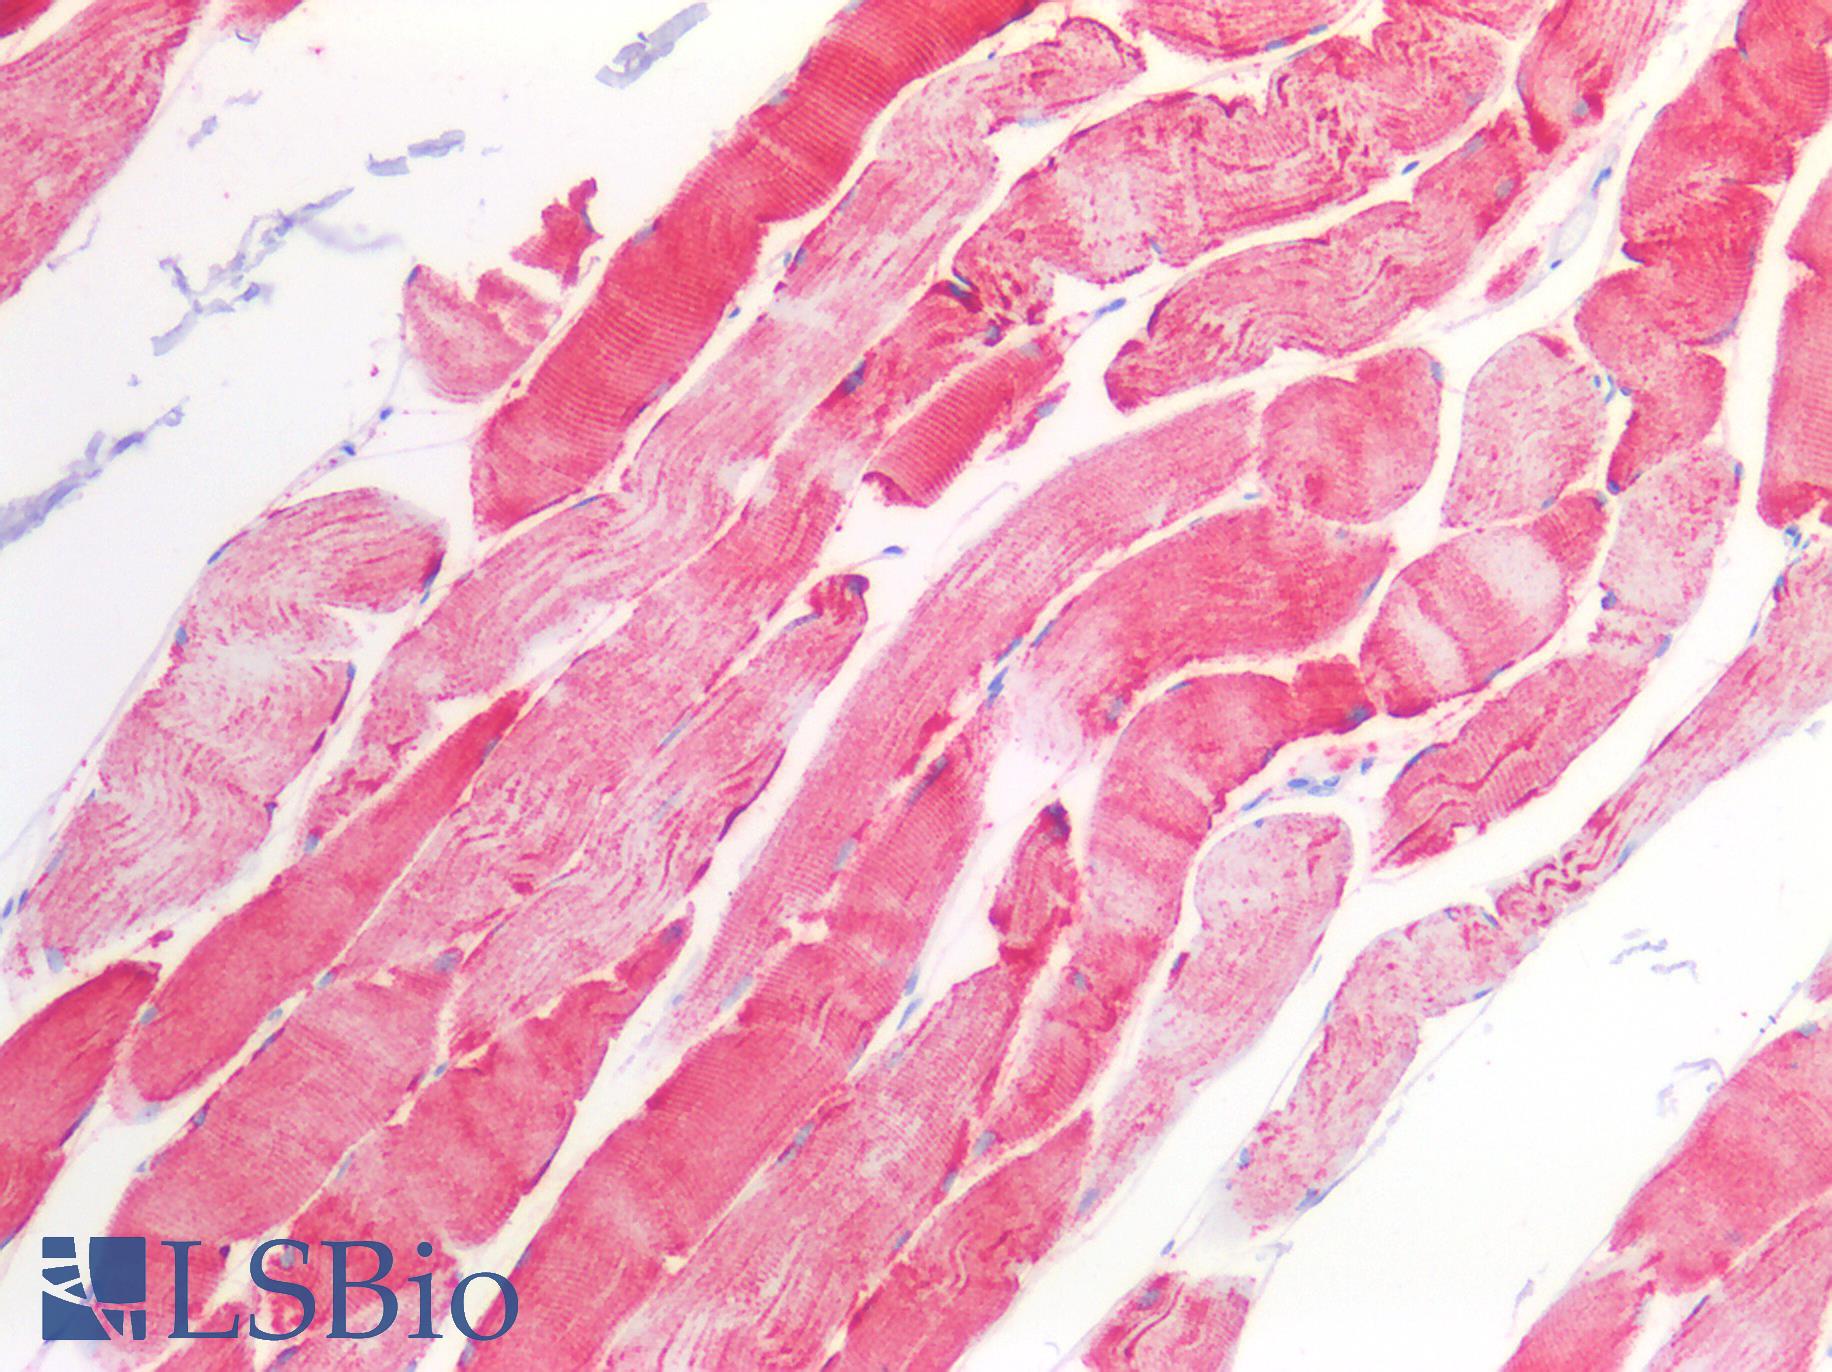 CD157 Antibody - Human Skeletal Muscle: Formalin-Fixed, Paraffin-Embedded (FFPE)